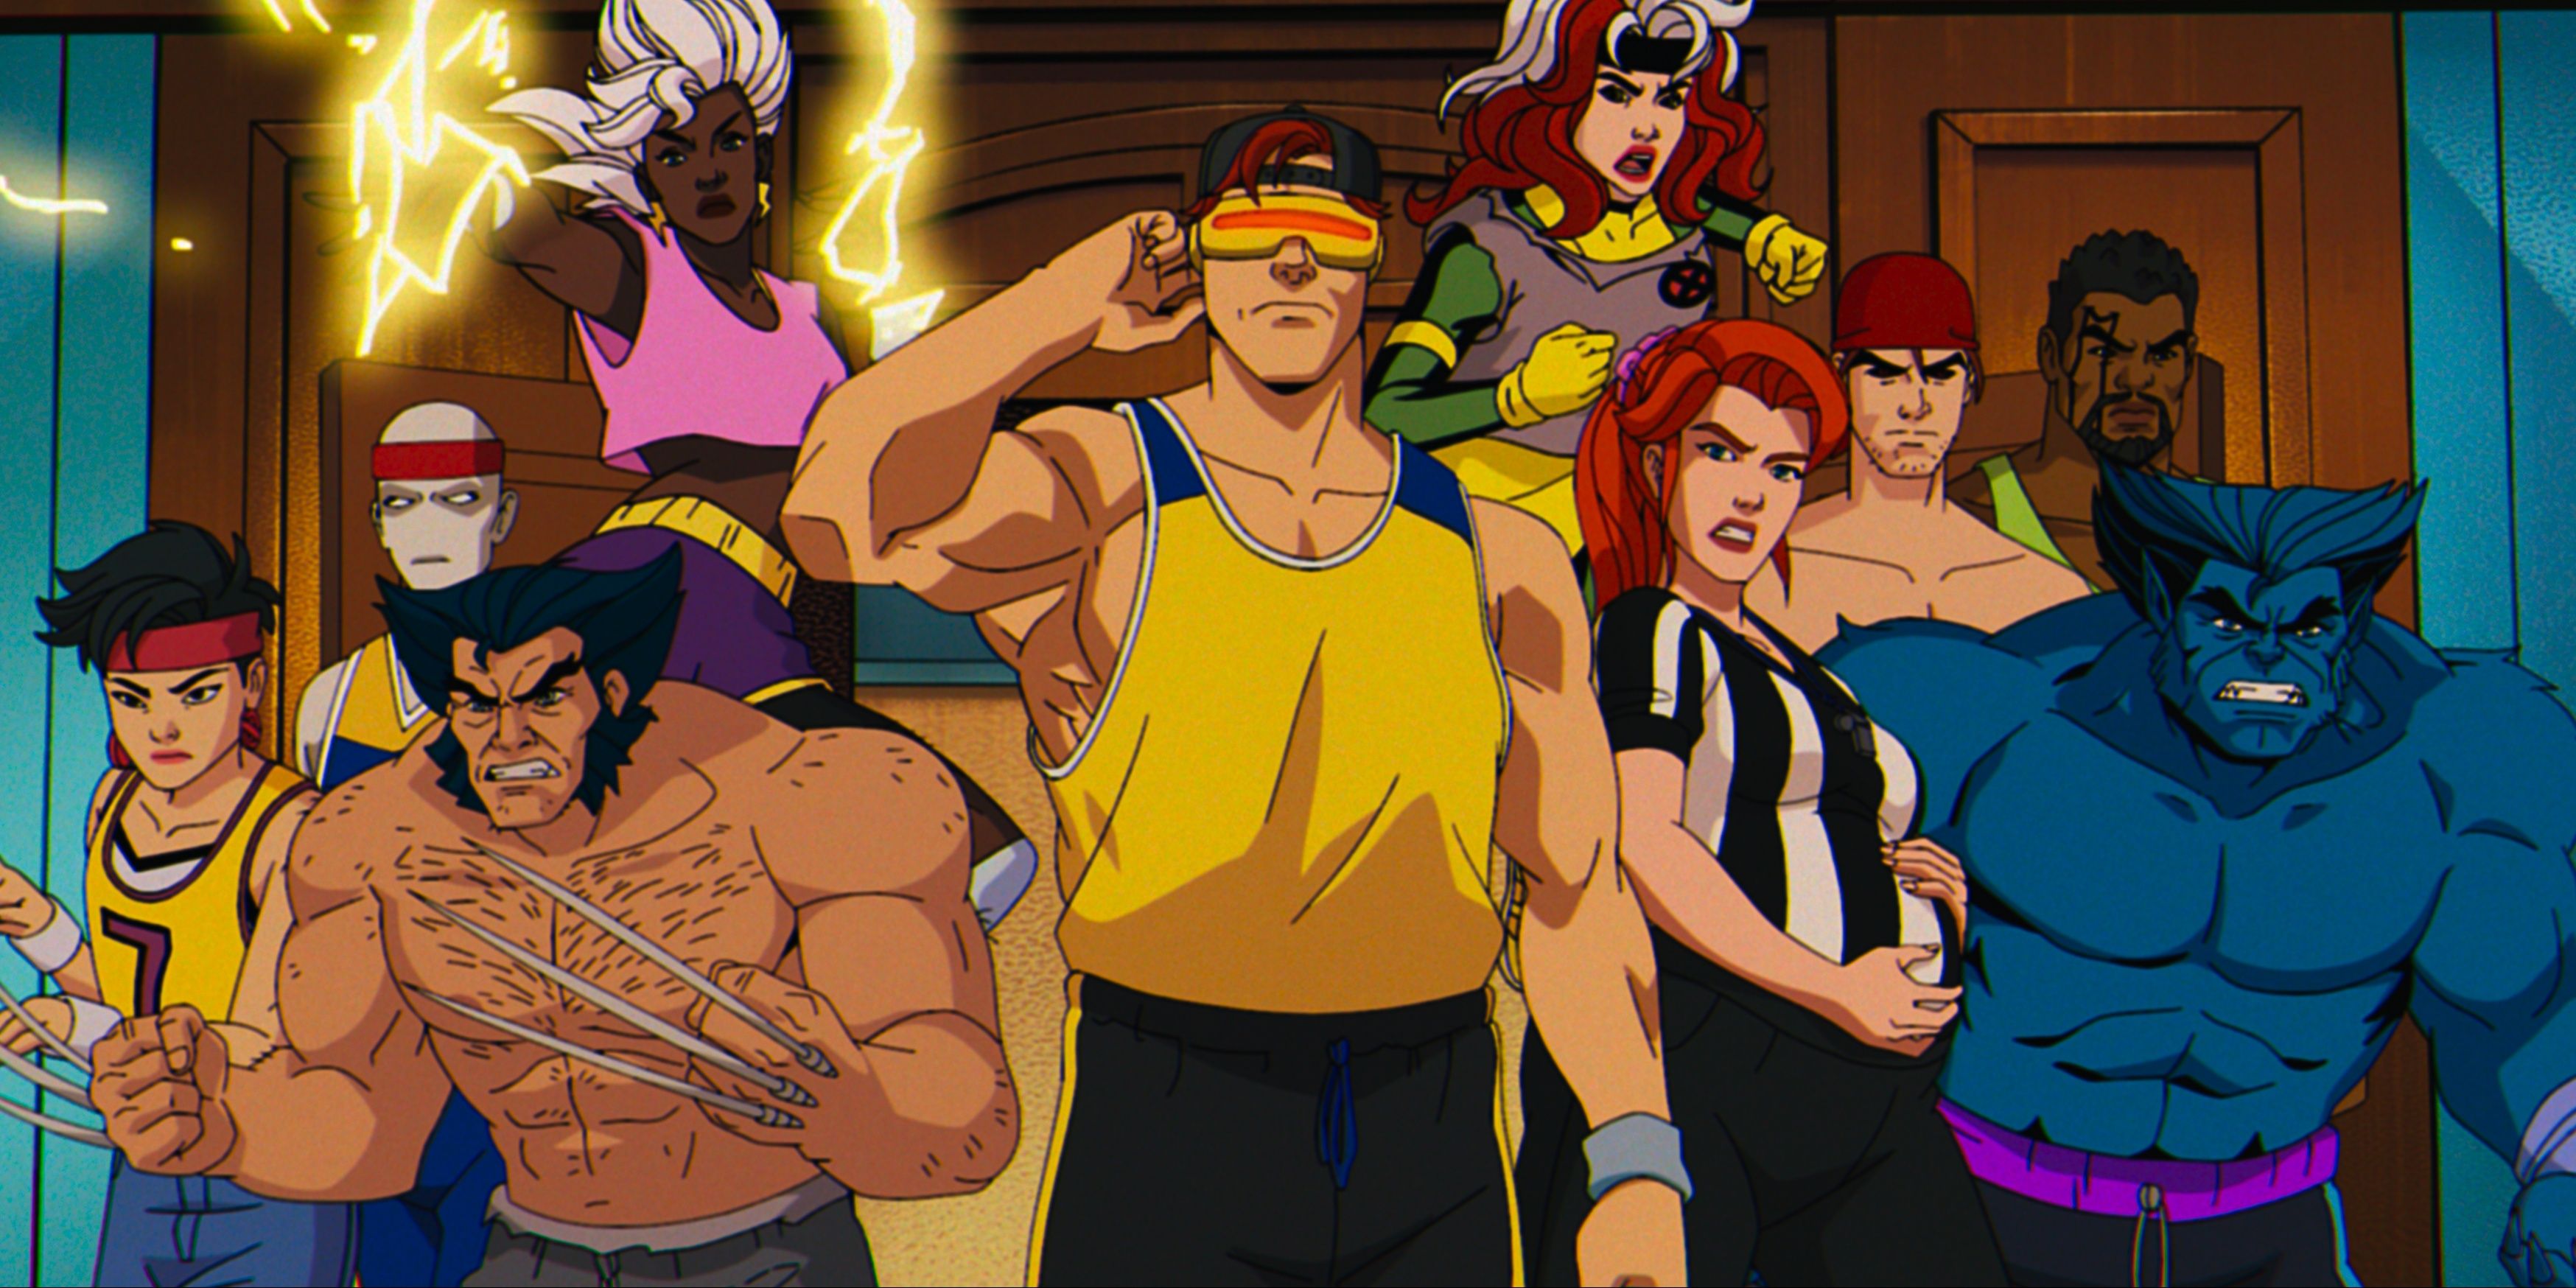 The main characters from X-Men 97 standing together.